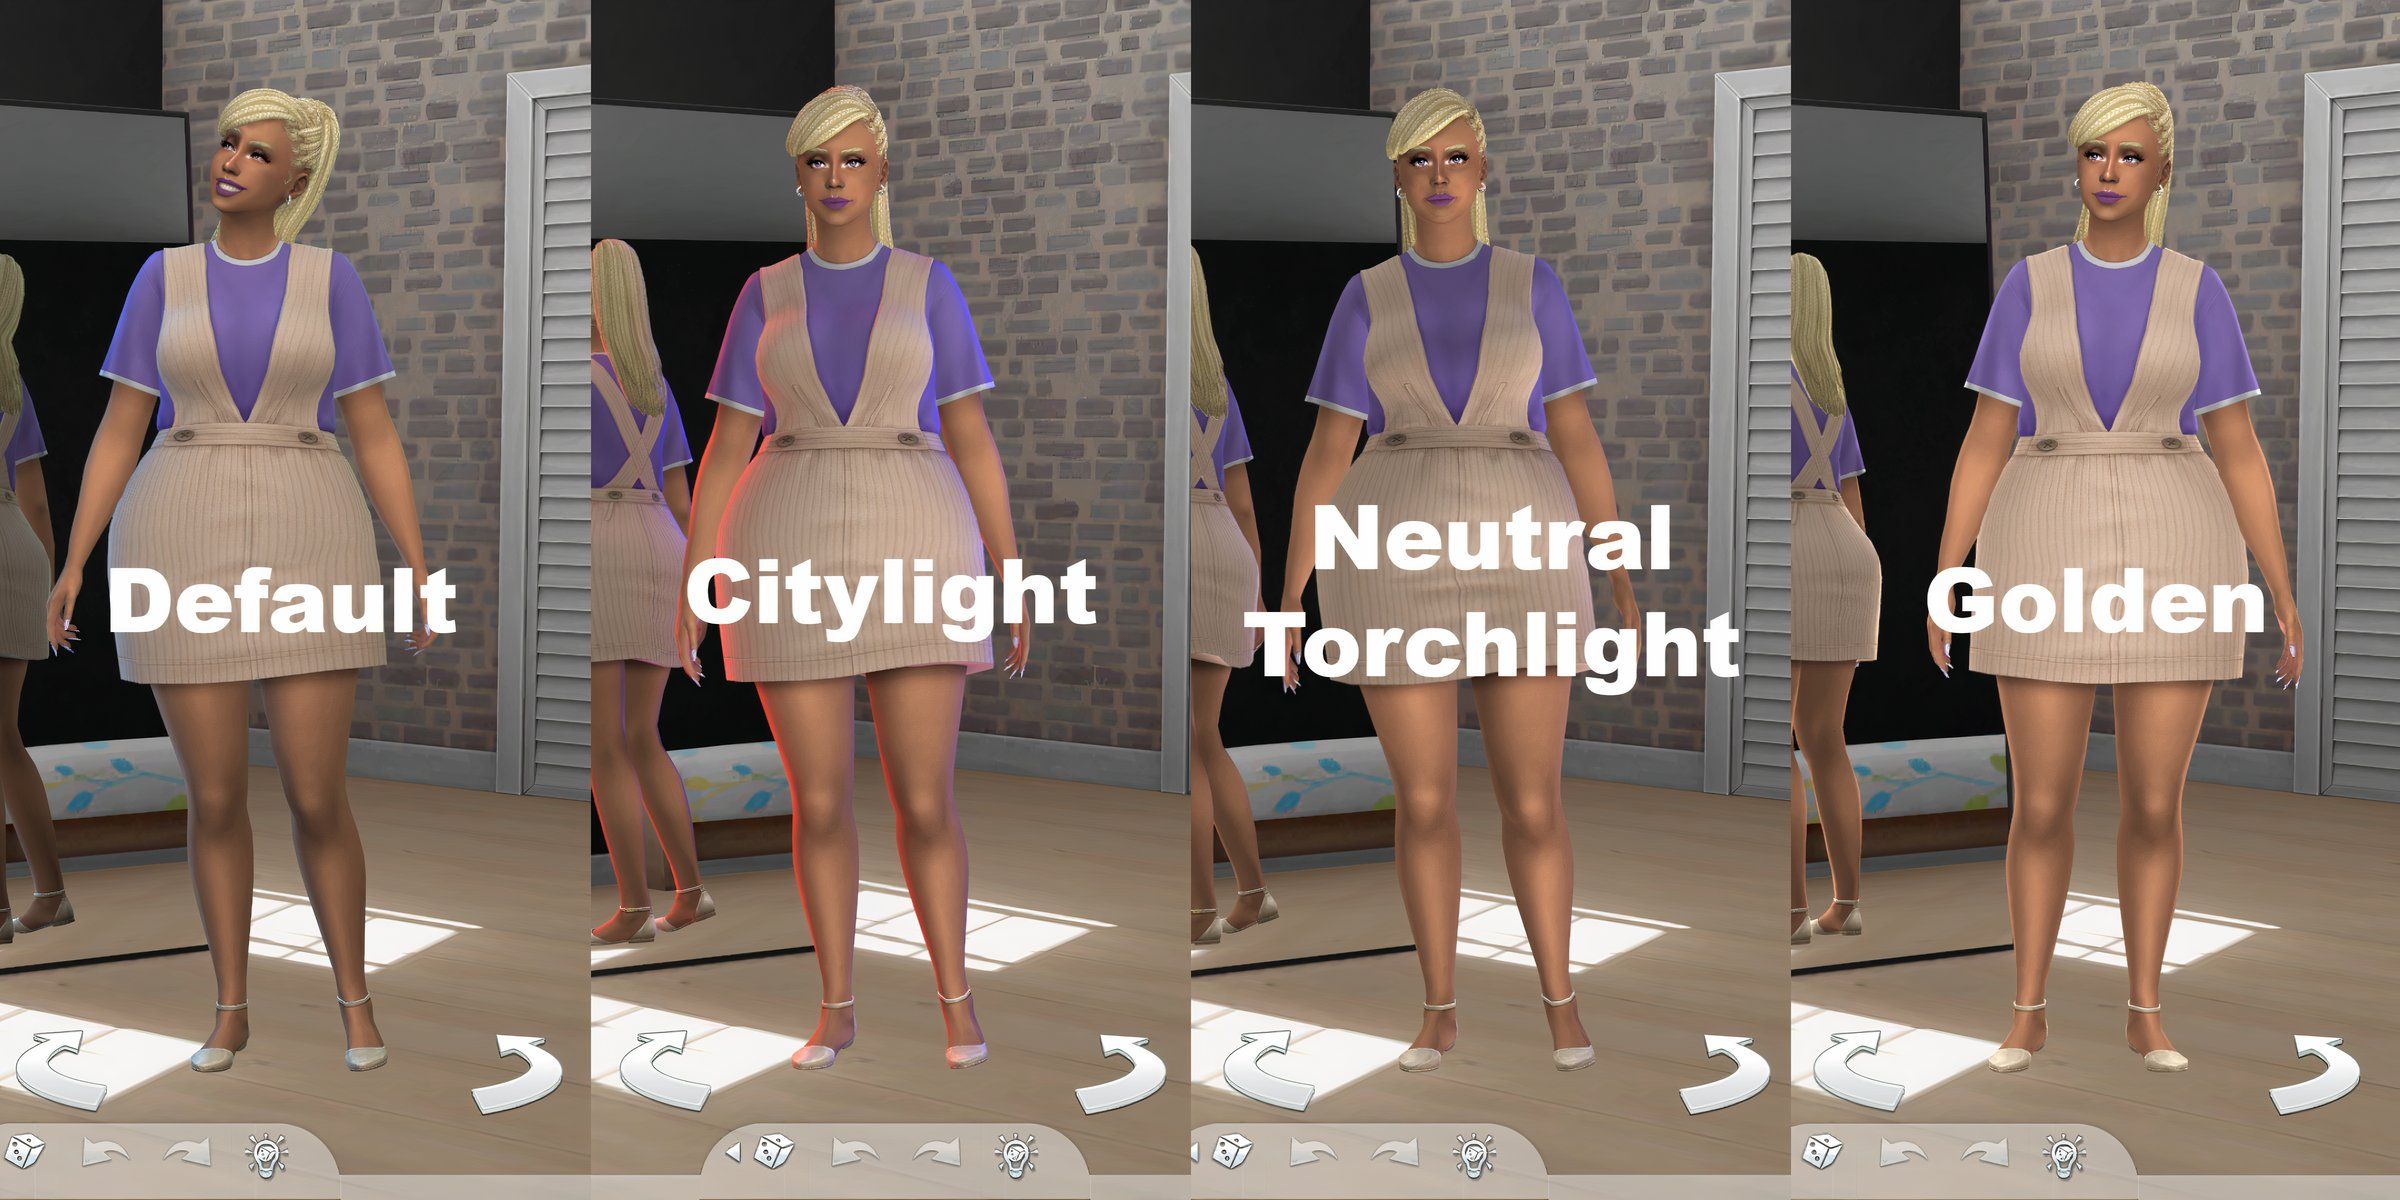 Four different shades of modded CAS lighting, including the default, citylight, neutral torchlight, and golden lighting for the Create-a-Sim screen